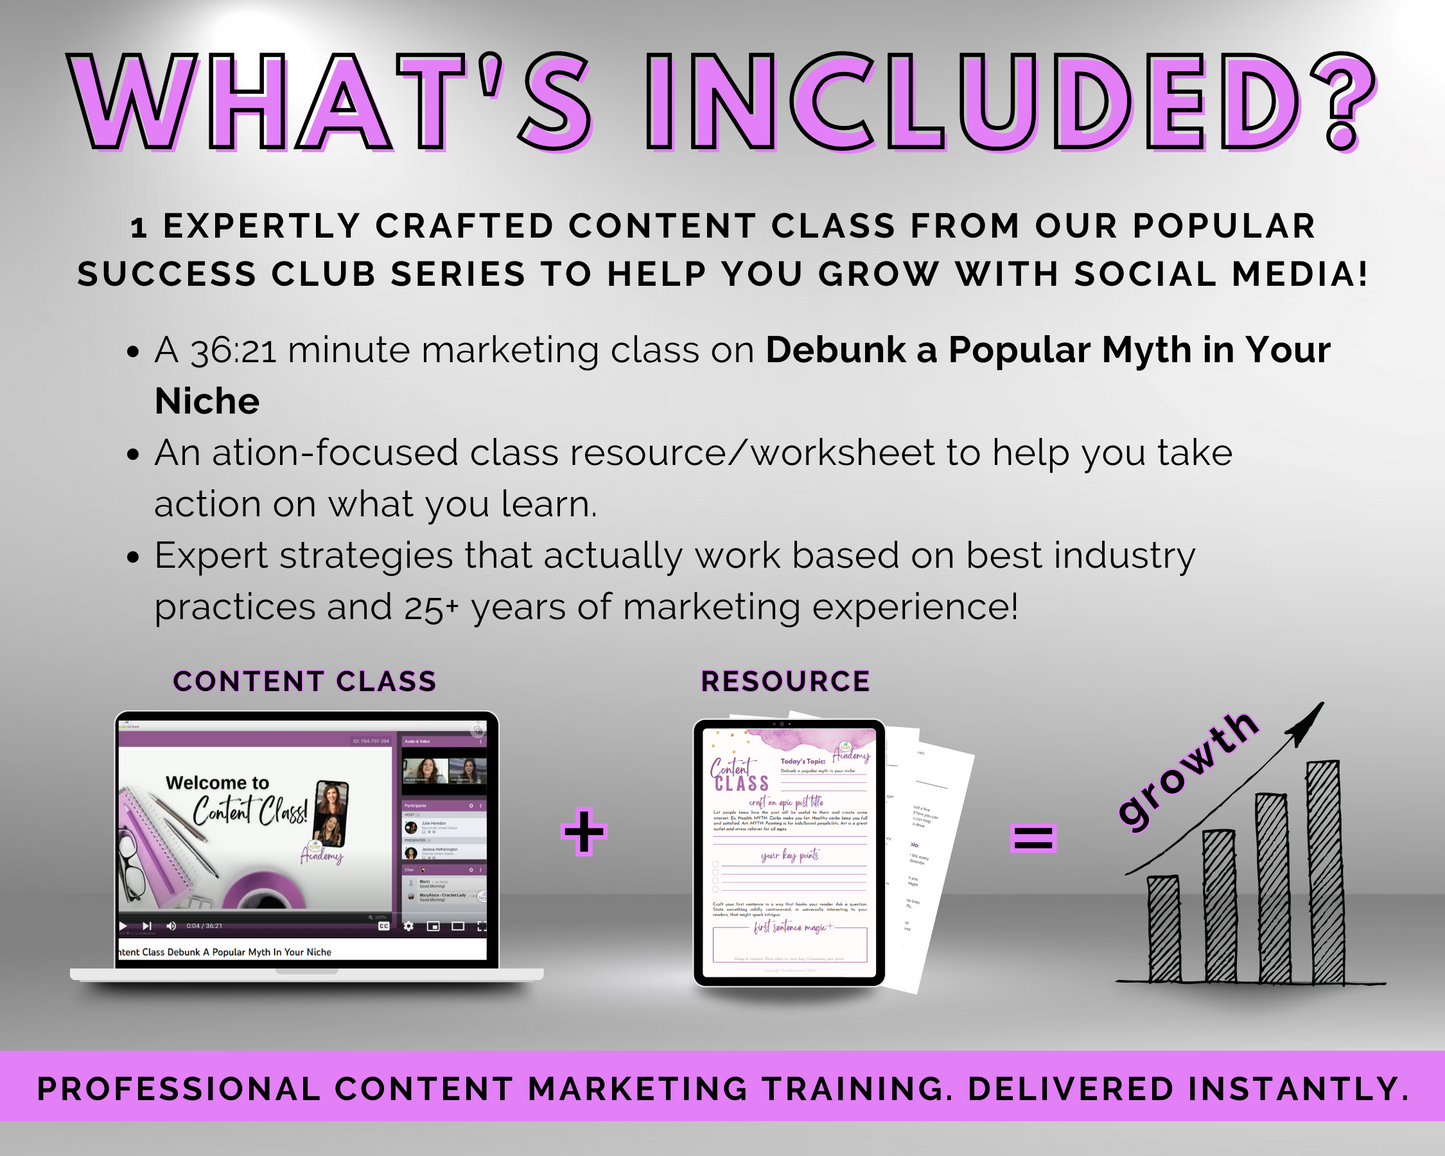 Content Class - Debunk a Popular Myth in Your Niche Masterclass